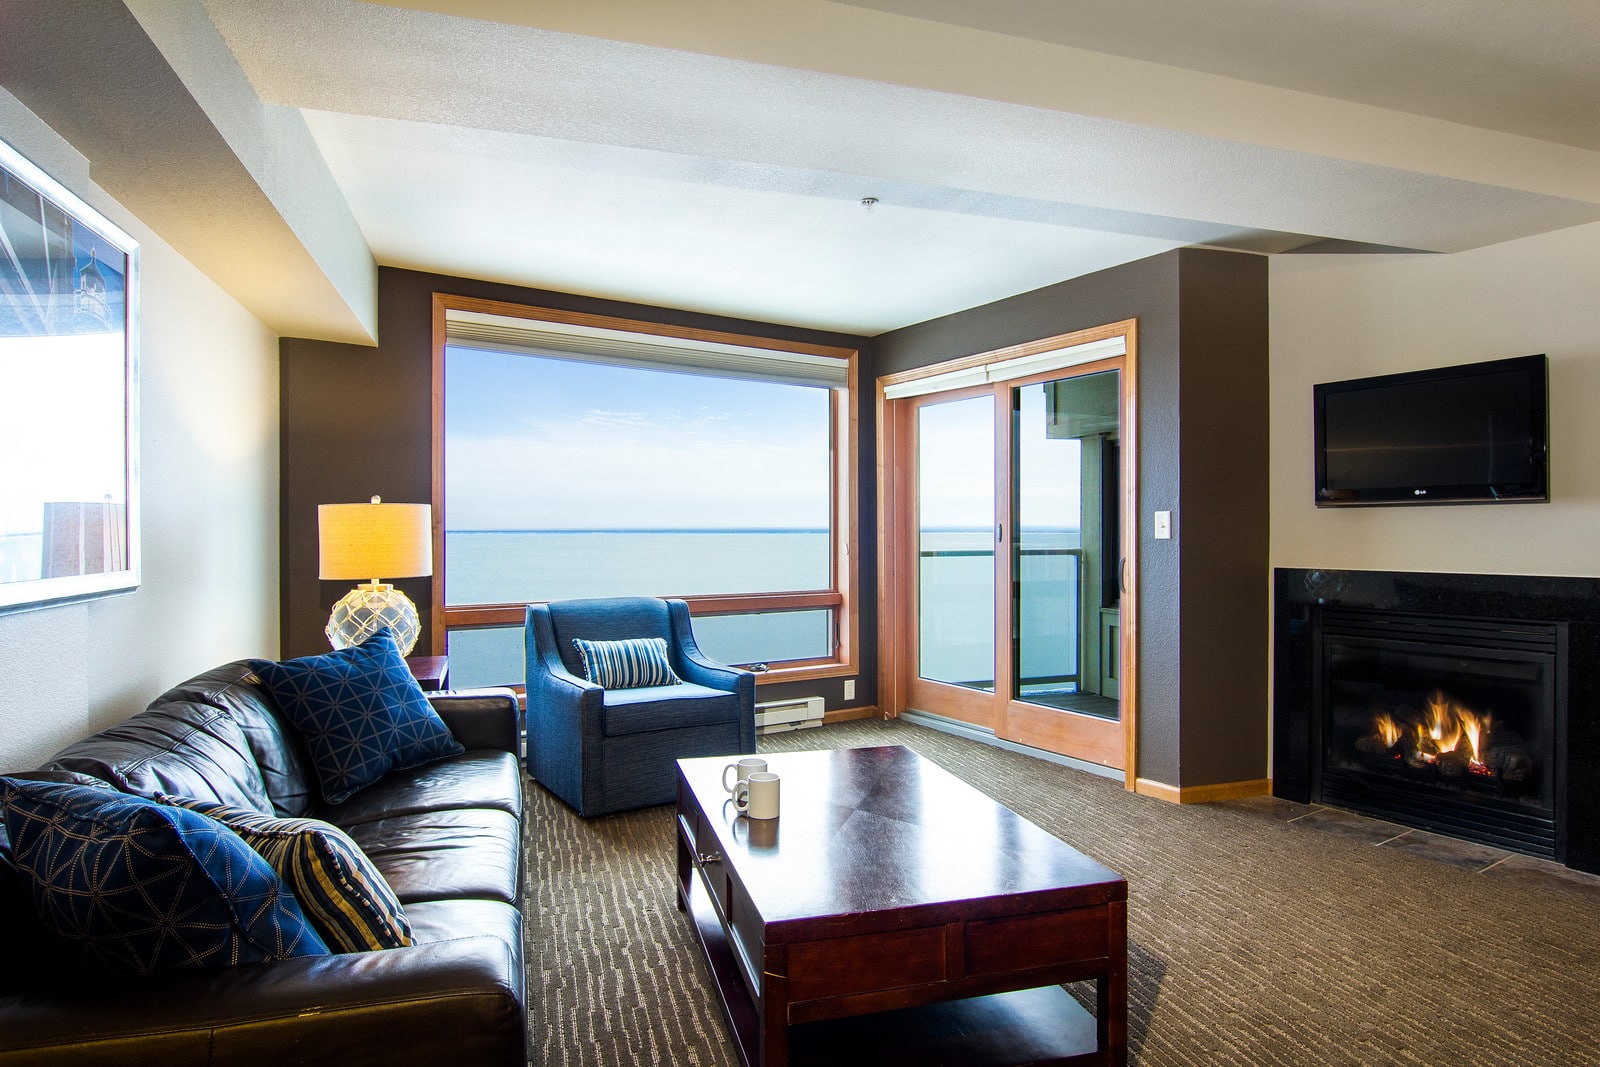 2 Bedroom Condo Beacon Pointe Duluth Lakeview Hotel On Lake